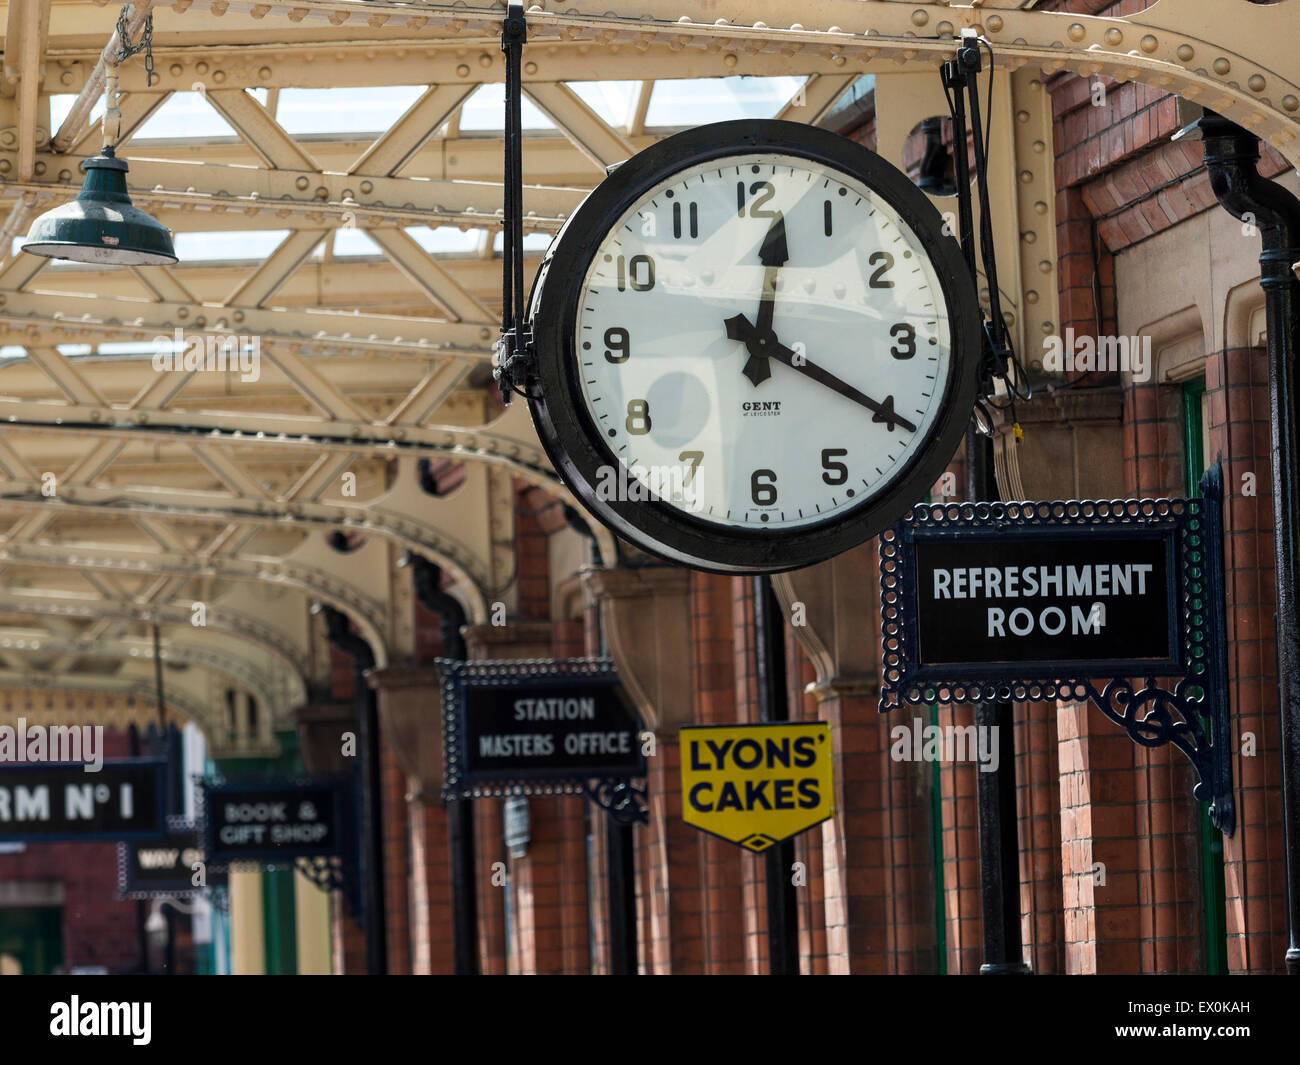 vintage station platform clock ,at the Great Central Railway,Loughborough station,Leicestershire,Britain. Stock Photo